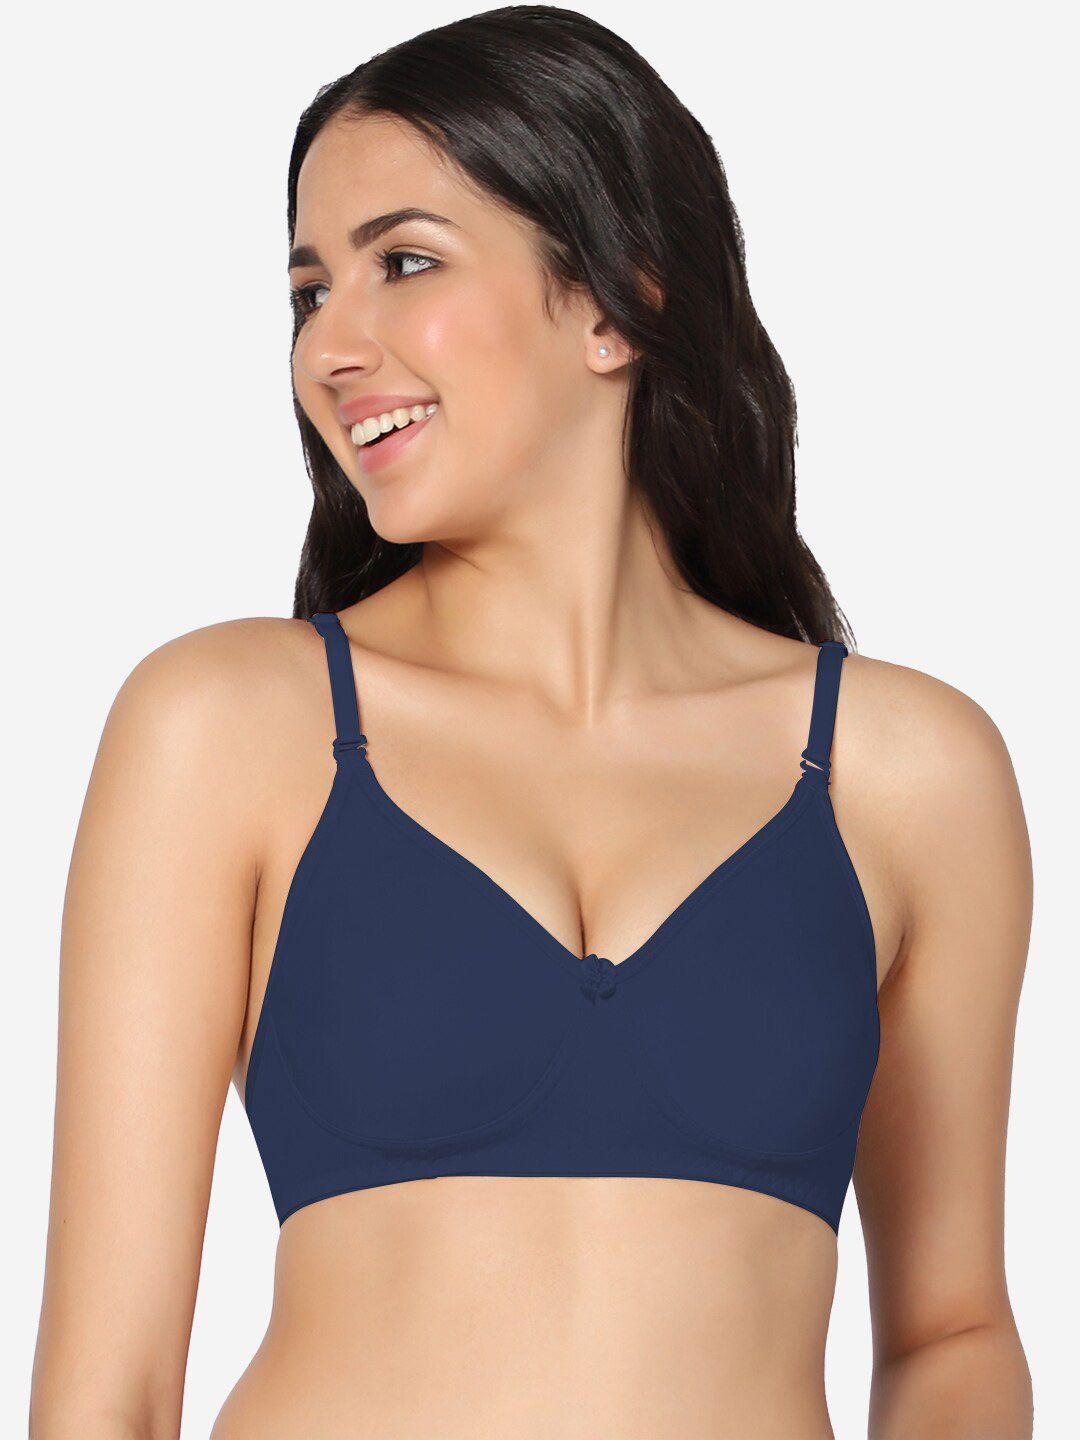 in-care-full-coverage-lightly-padded-all-day-comfort-super-support-bra-cotton-t-shirt-bra